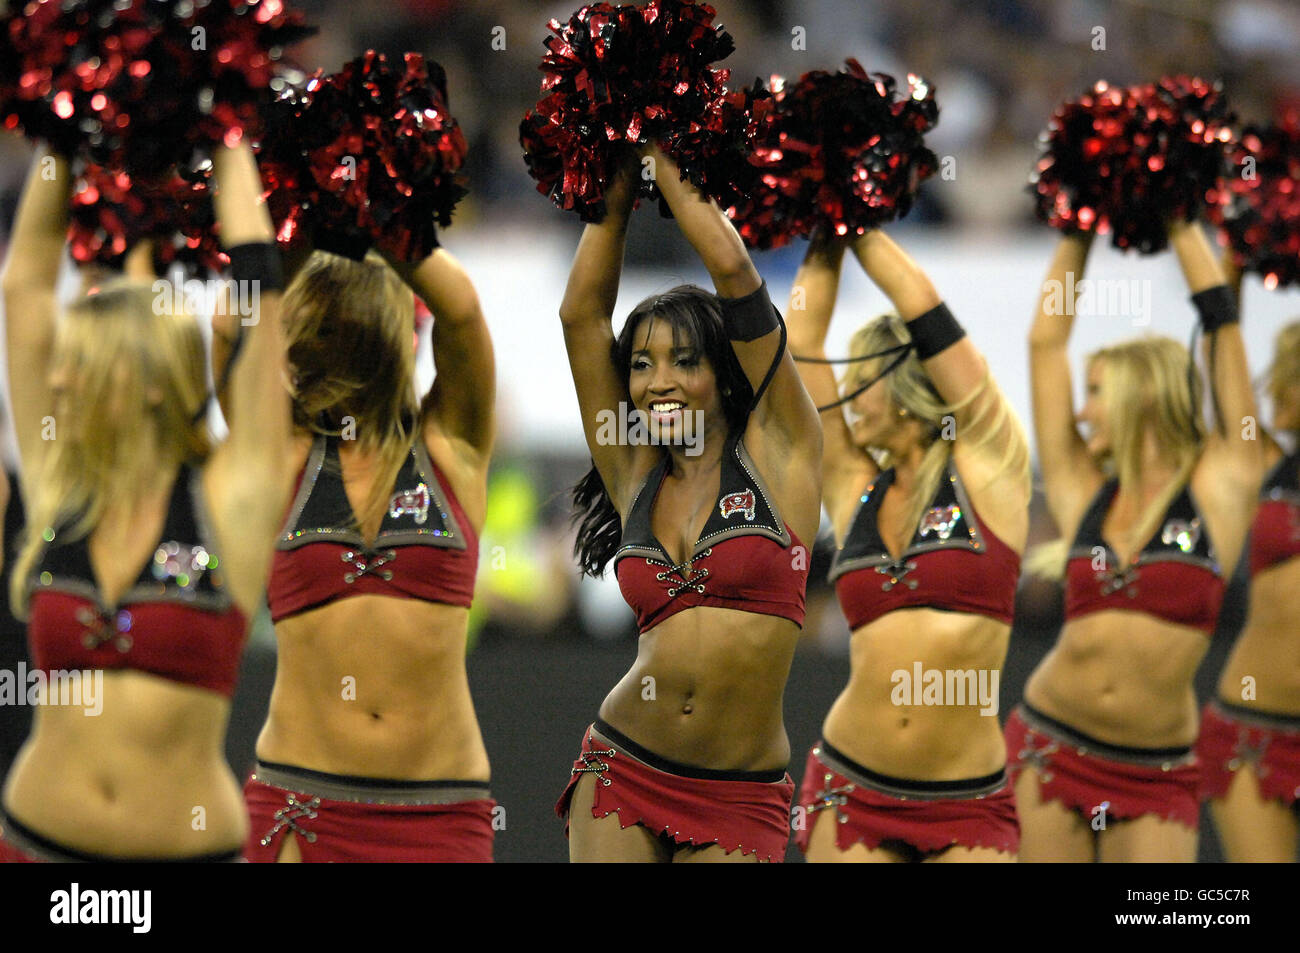 Tampa Bay Buccaneers' cheerleaders entertain the crowd before the start of the NFL match at Wembley Stadium, London. Stock Photo